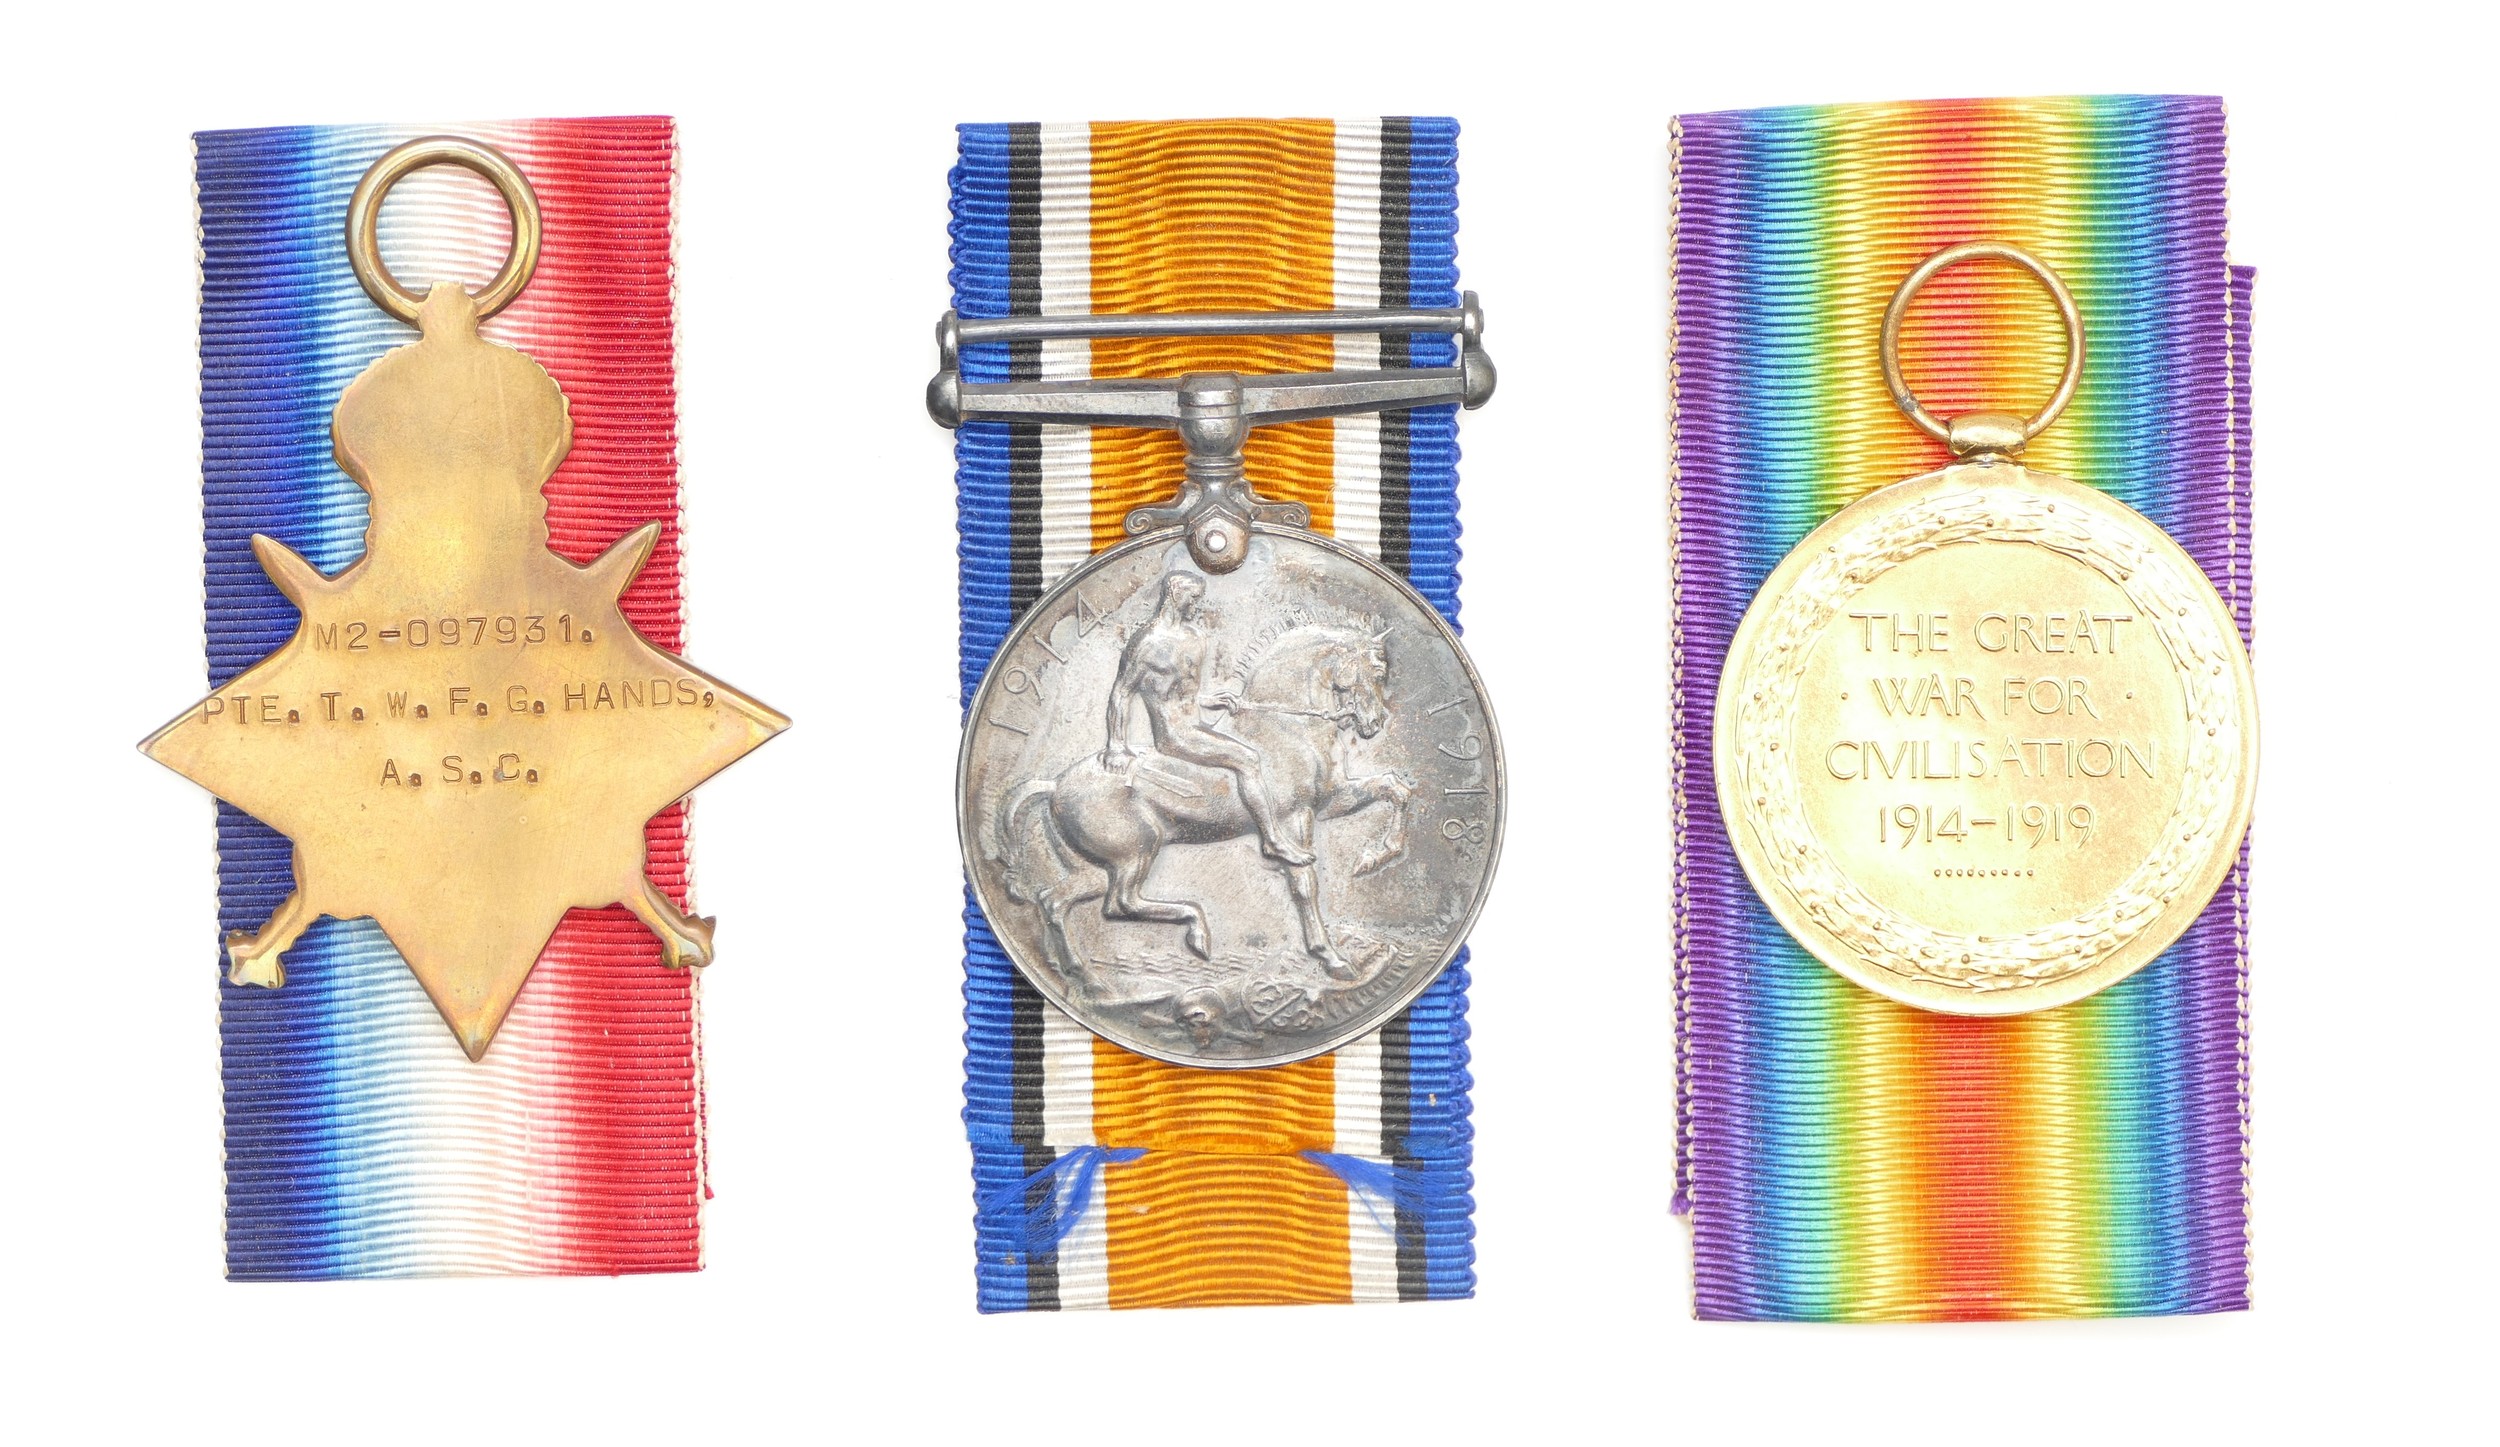 WW1 trio, 1914-1915 Star, War and Victory, Awarded to Pte T. W. F. G. Hands, A. S. C. M2-097931, - Image 2 of 4